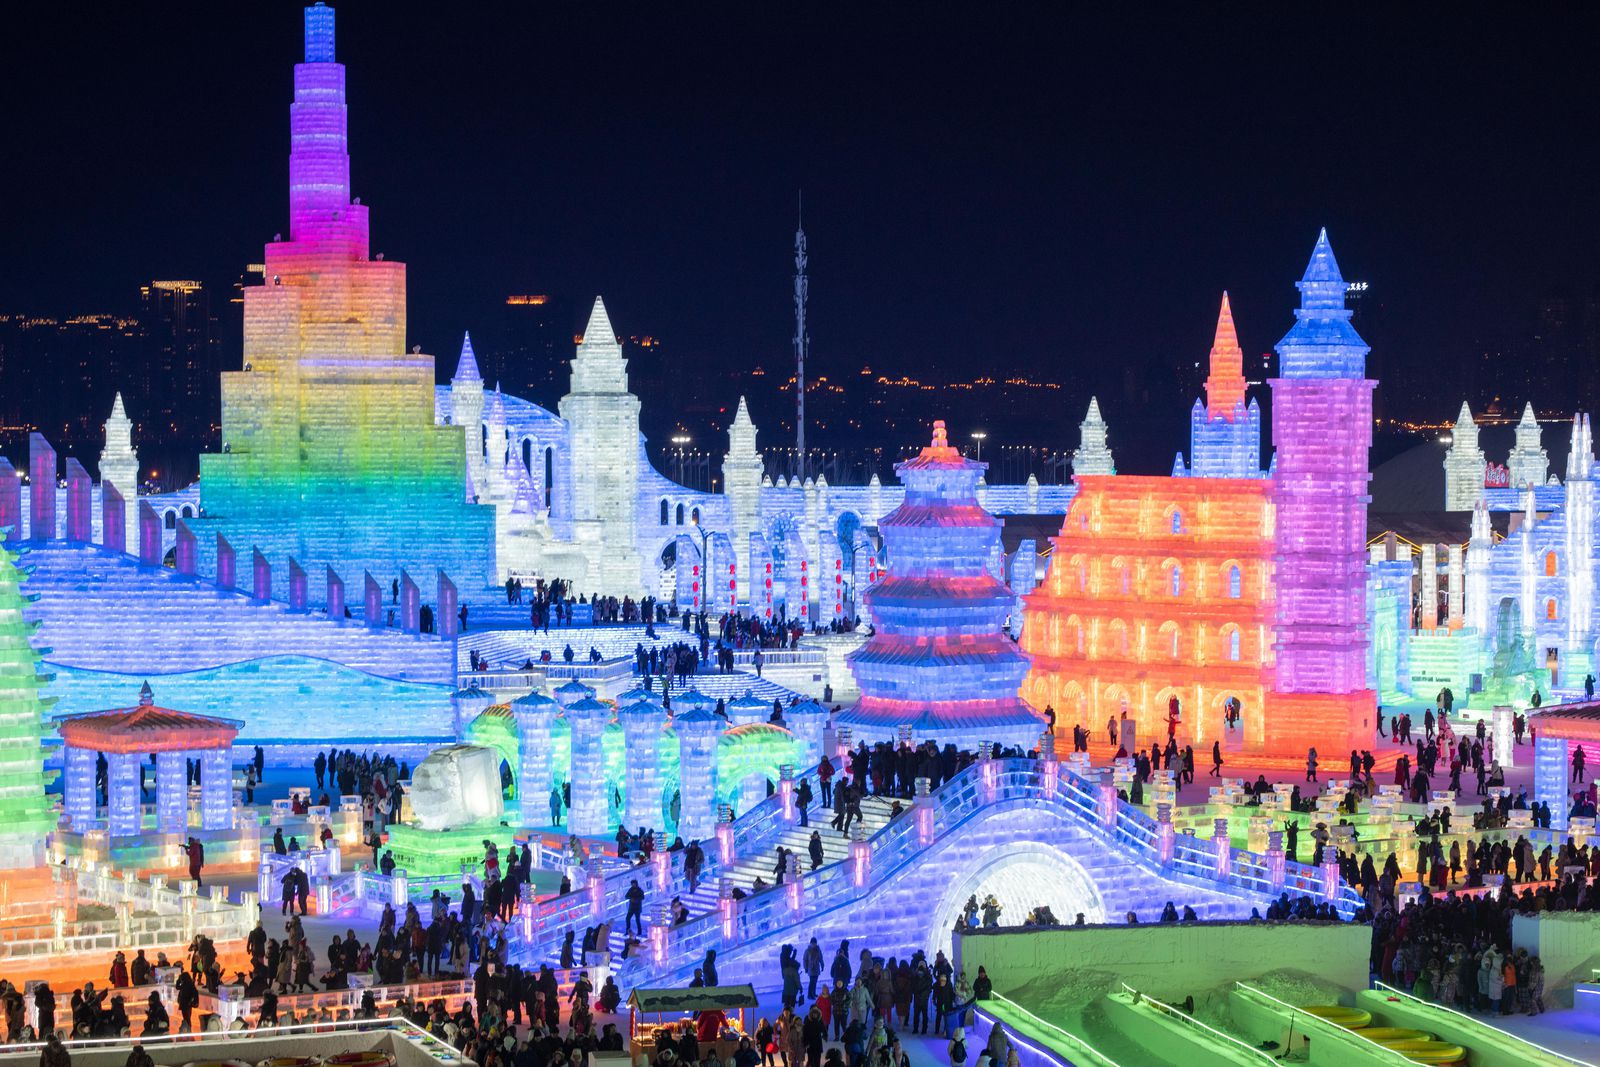 Visiting the Ice festival in Harbin; Dates, Tickets and Everything Else!